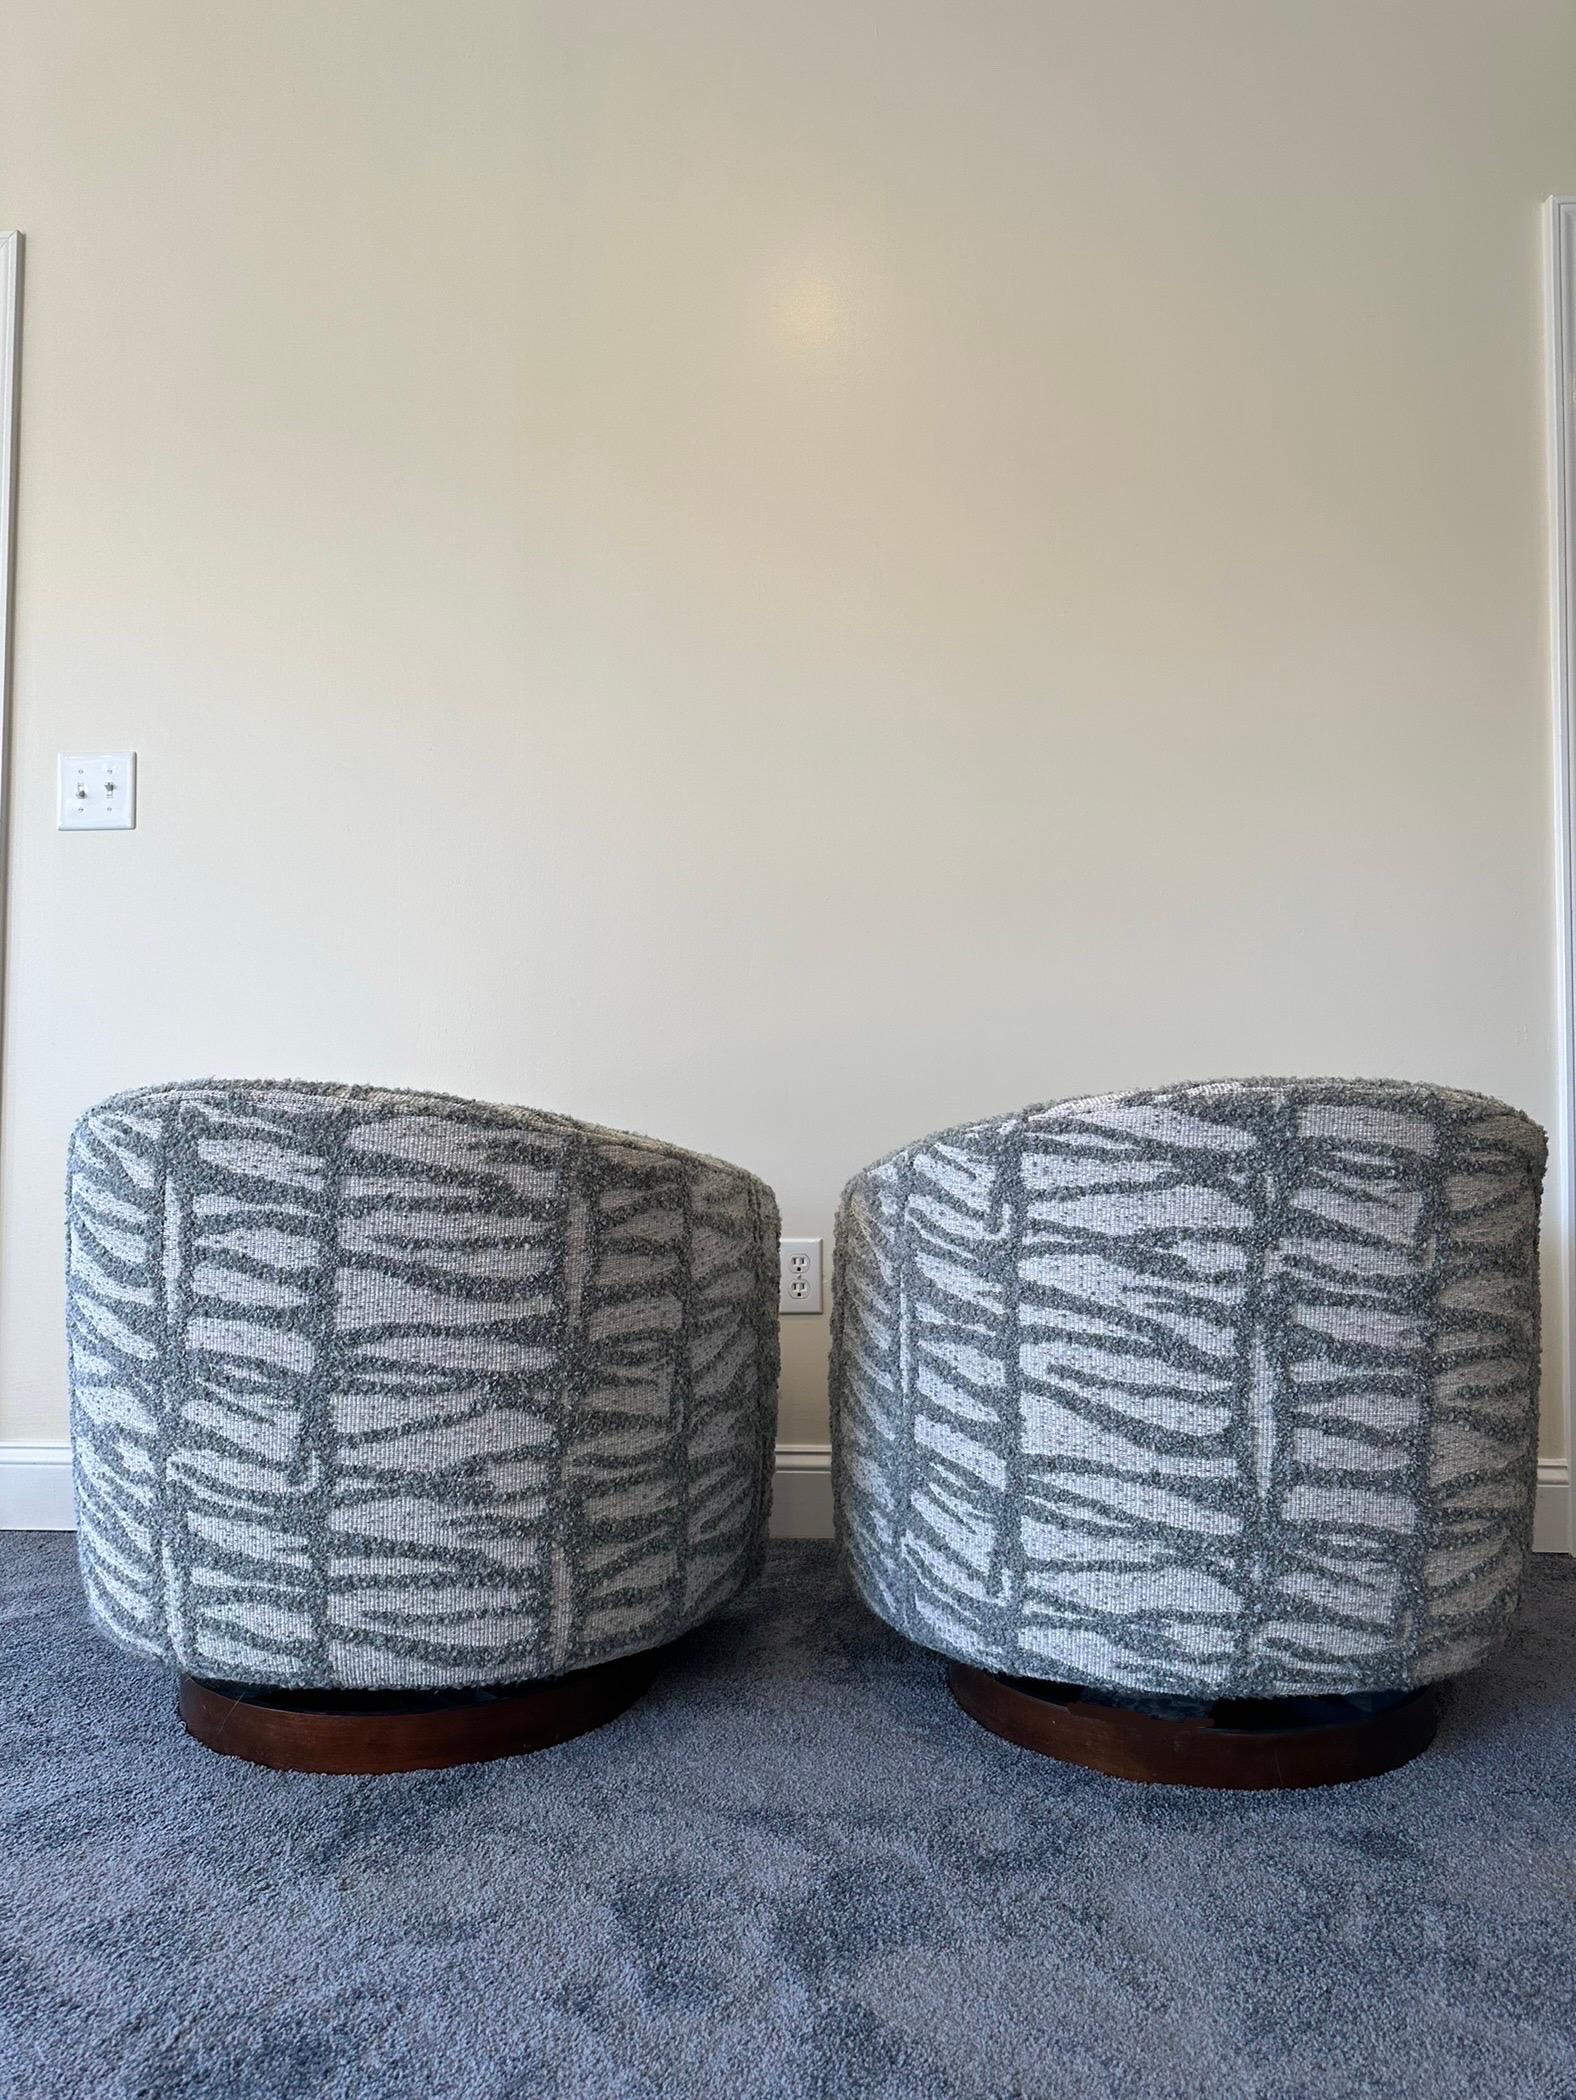 Experience unparalleled style and comfort with this extraordinary pair of swivel and tilt club chairs designed by Milo Baughman for Thayer Coggin. Recently upholstered in a striking geometric textured fabric, these chairs seamlessly blend bold